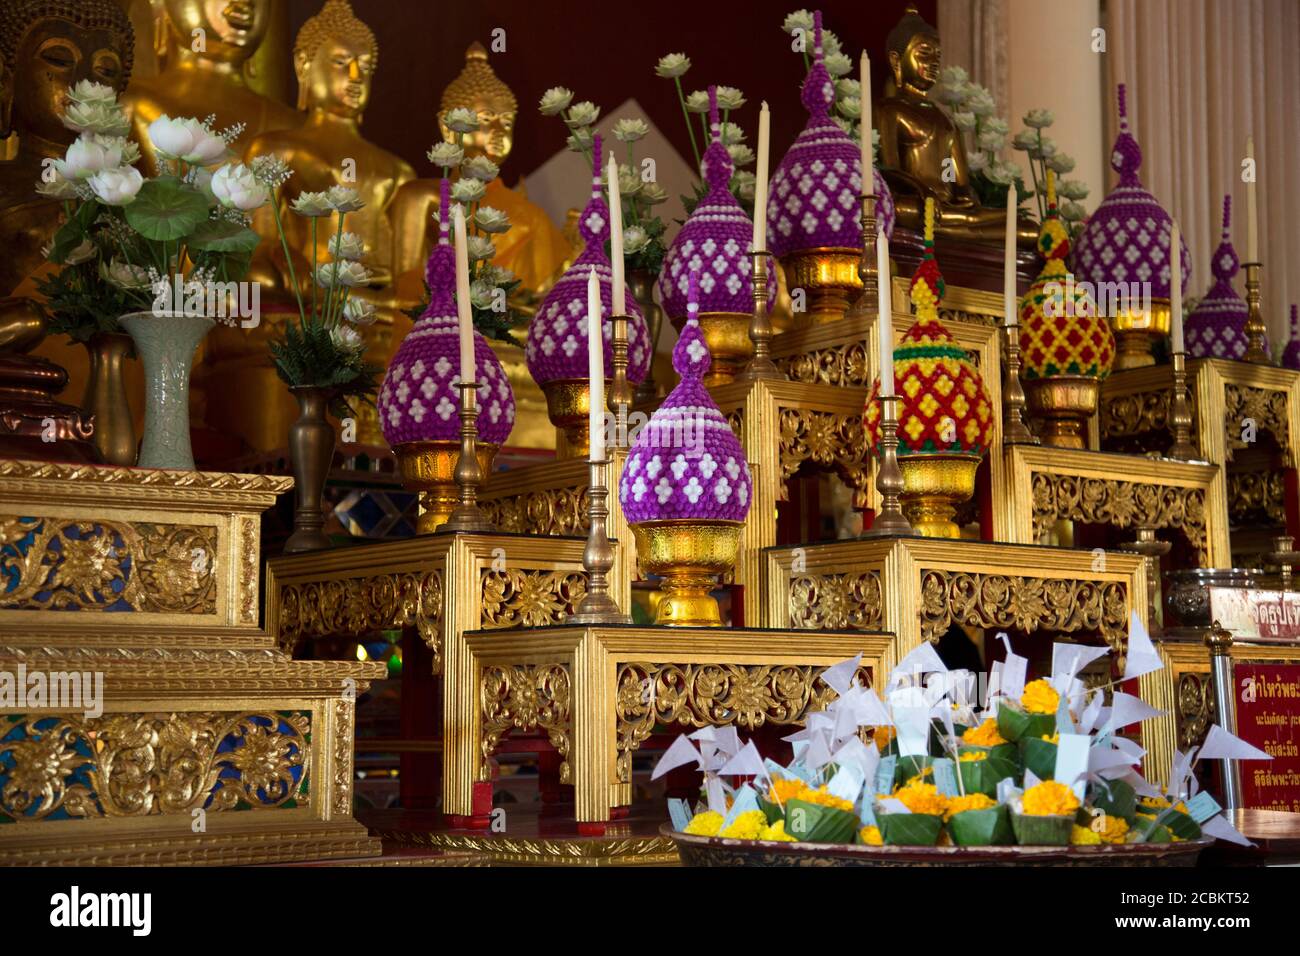 Buddha figurines and ornaments, Wat Phra Singh, Chiang Mai, Thailand Stock Photo